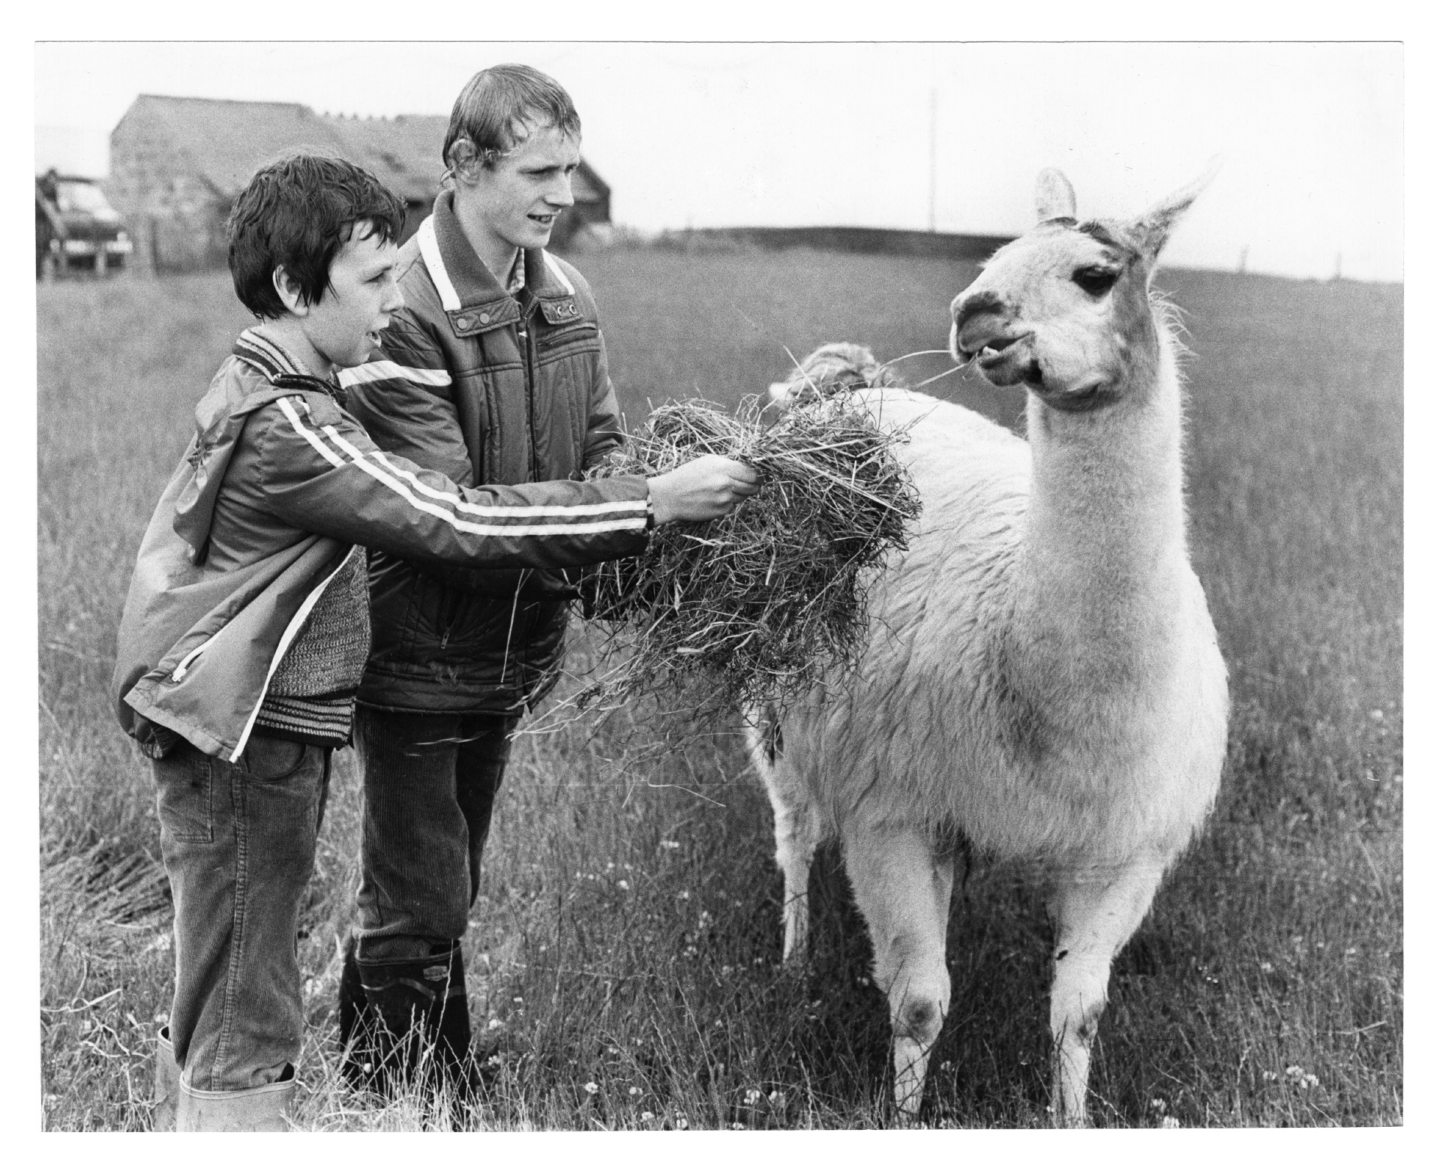 Two young boys feed Herbie the llama in 1979.